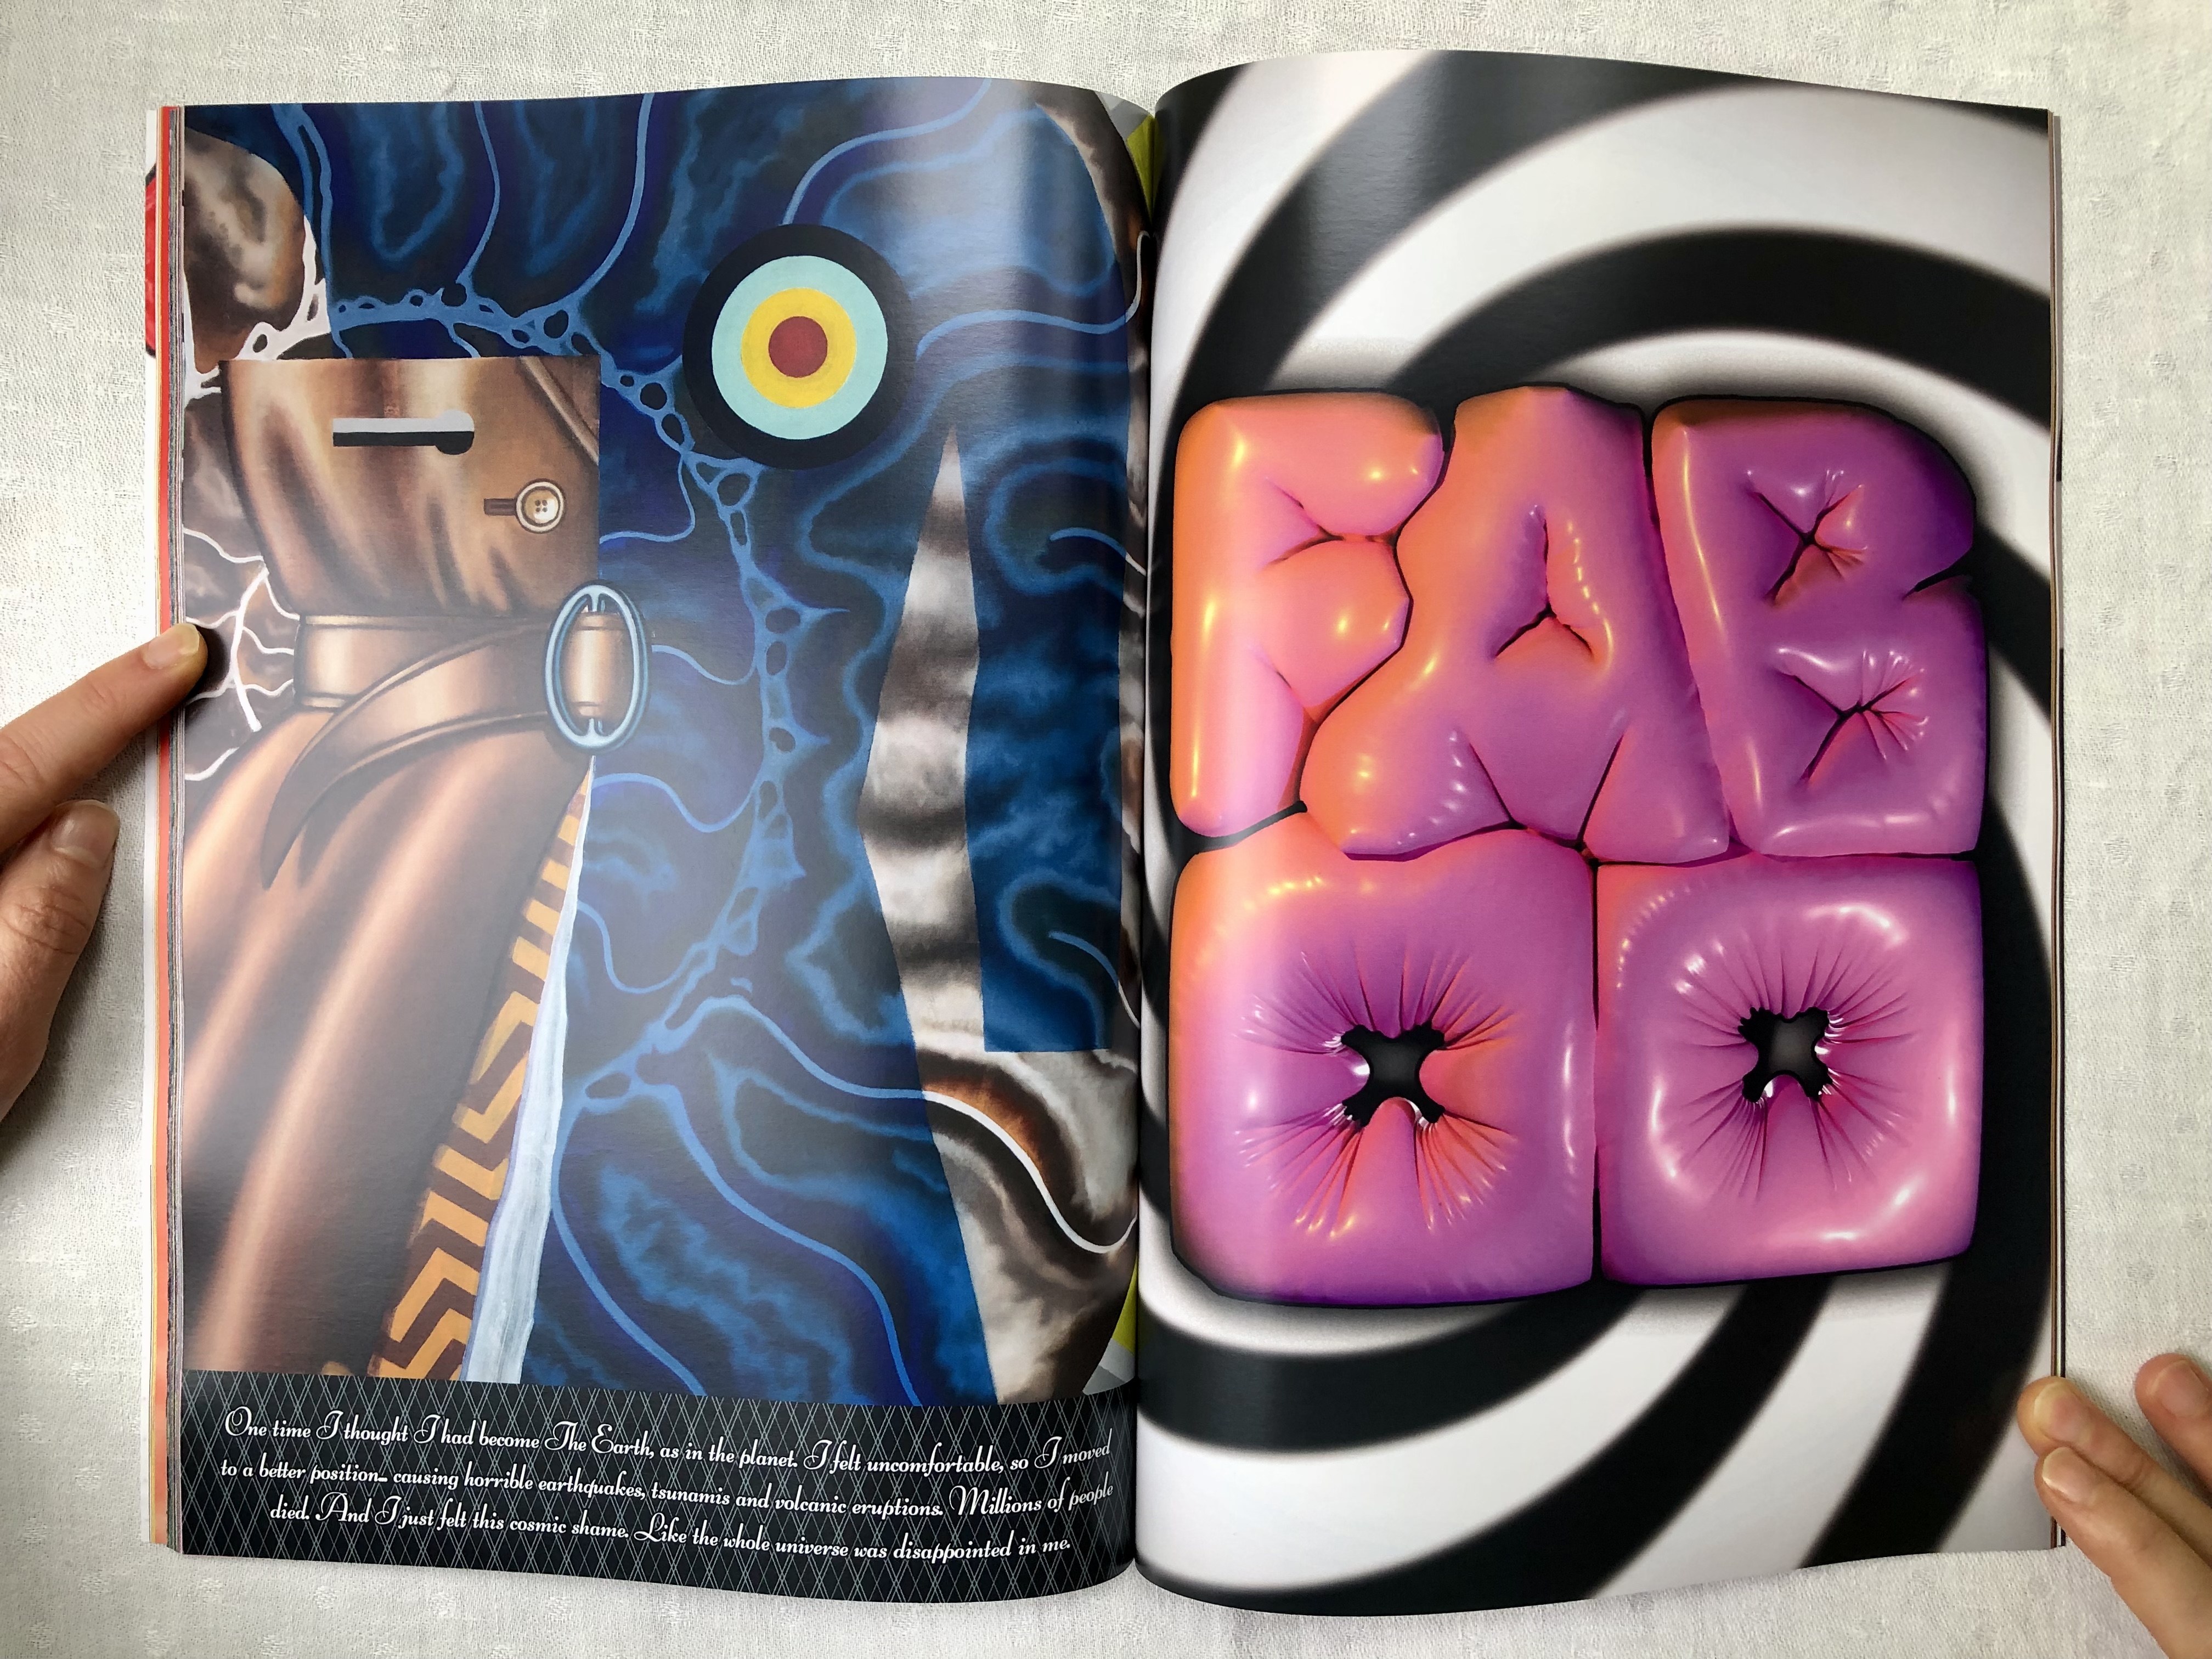 Magazine spread against a gray background. The left page has a collage of a trenchcoat against a colorful patterned background. The right page shows bubbly 3D text that reads Faboo against a spiral background.